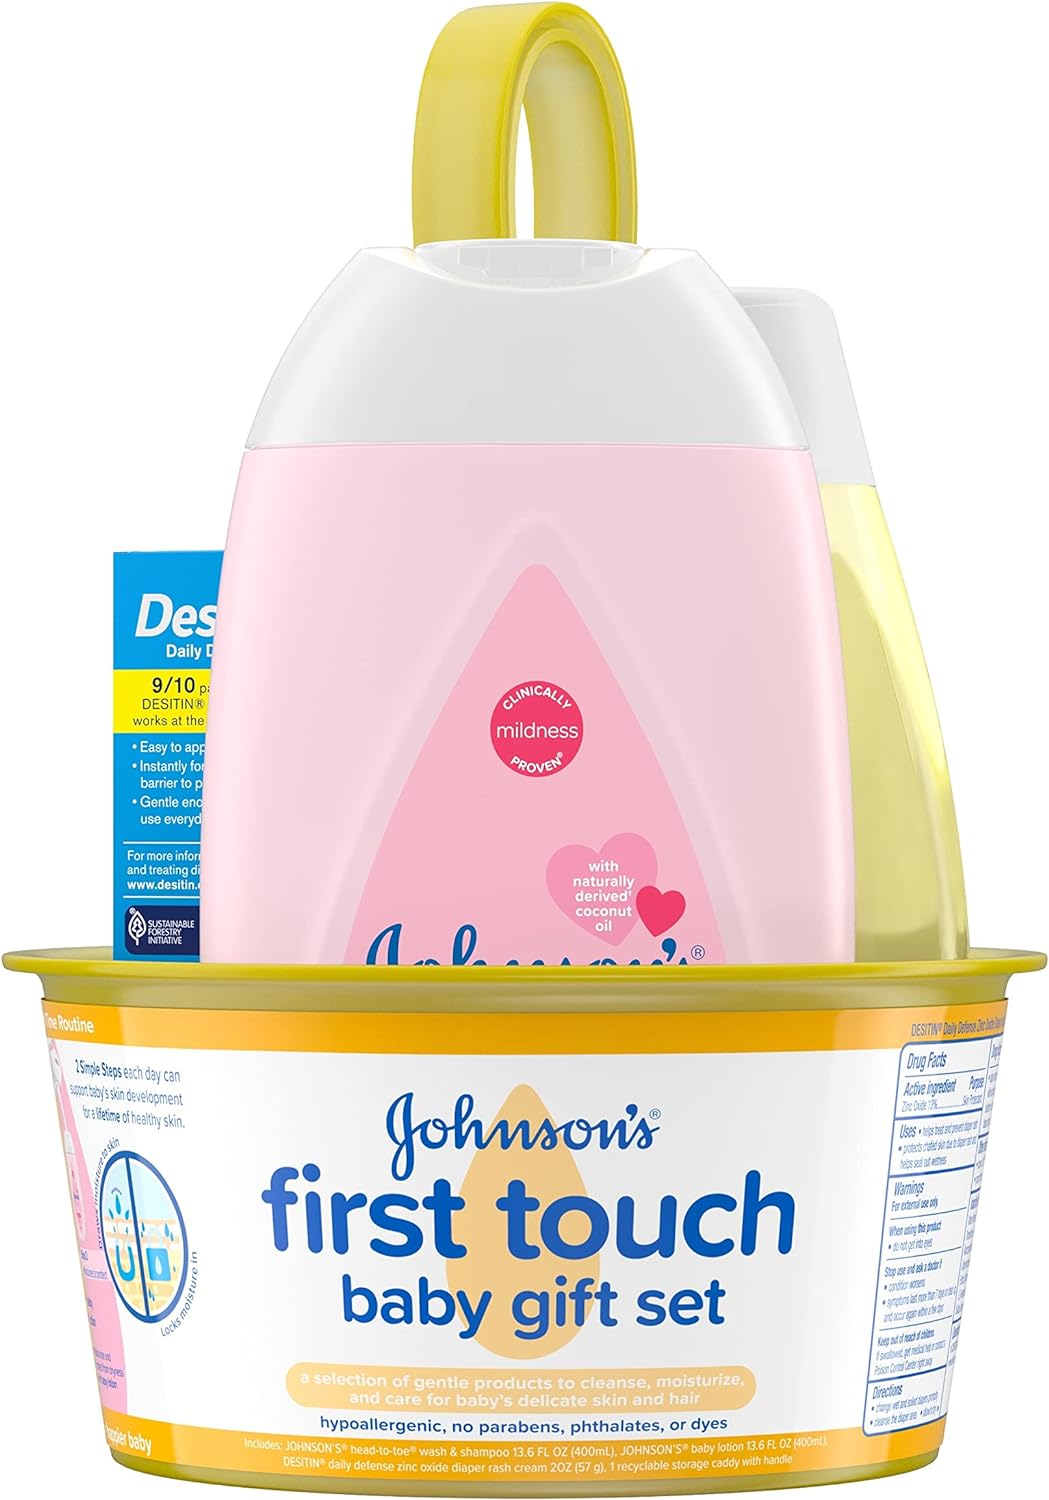 Johnson’s First Touch Baby Gift Set, Baby Bath, Skin & Hair Essential Products, Kit for New Parents with Wash & Shampoo, Lotion, & Diaper Rash Cream, Hypoallergenic & Paraben-Free, 4 items